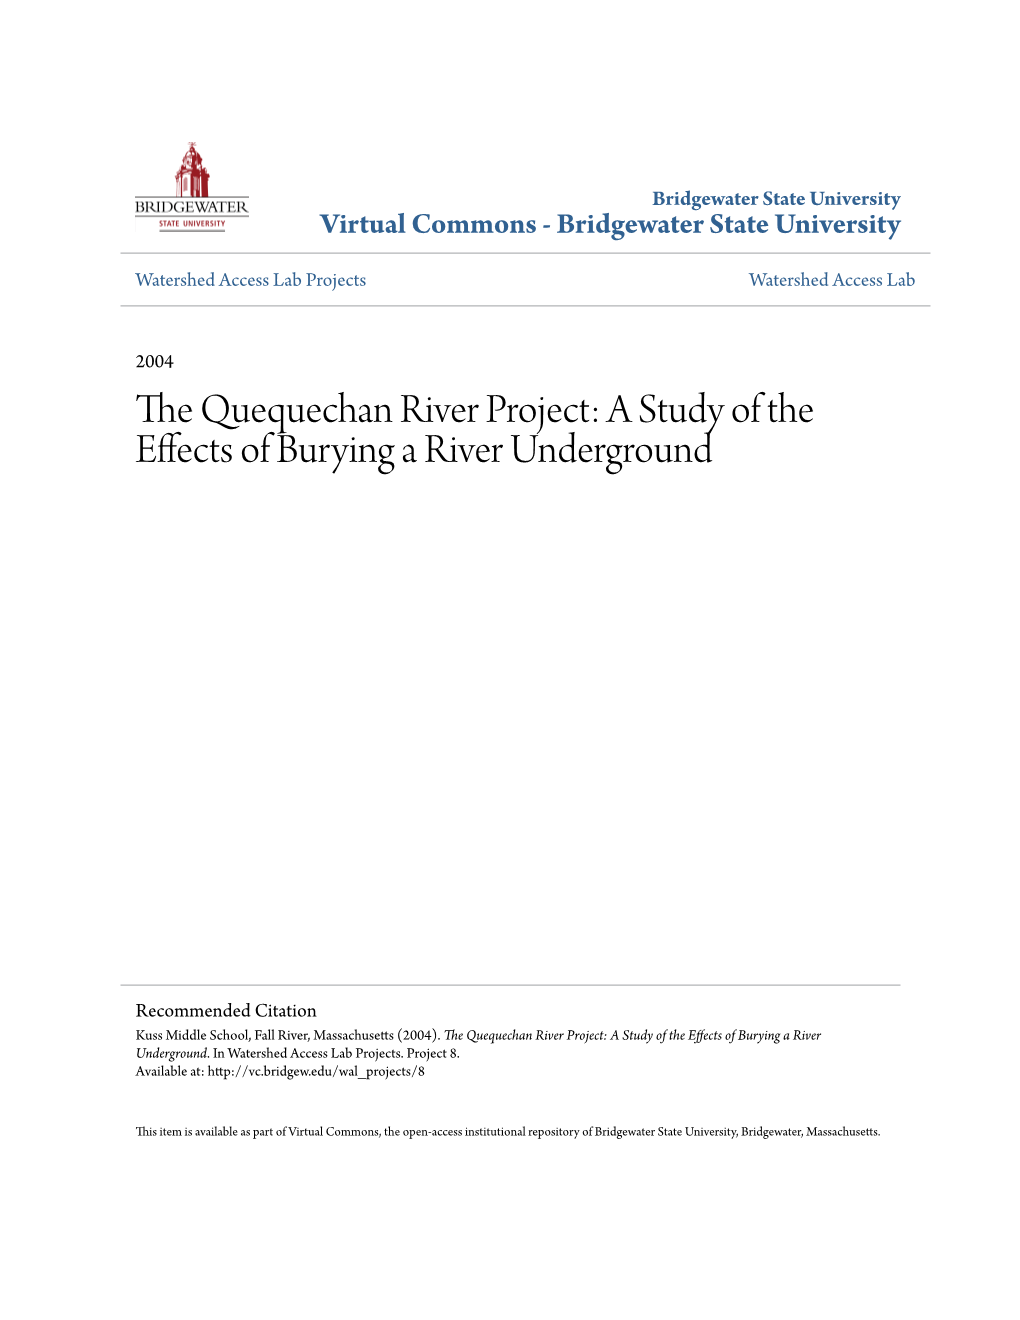 The Quequechan River Project: a Study of the Effects of Burying a River Underground